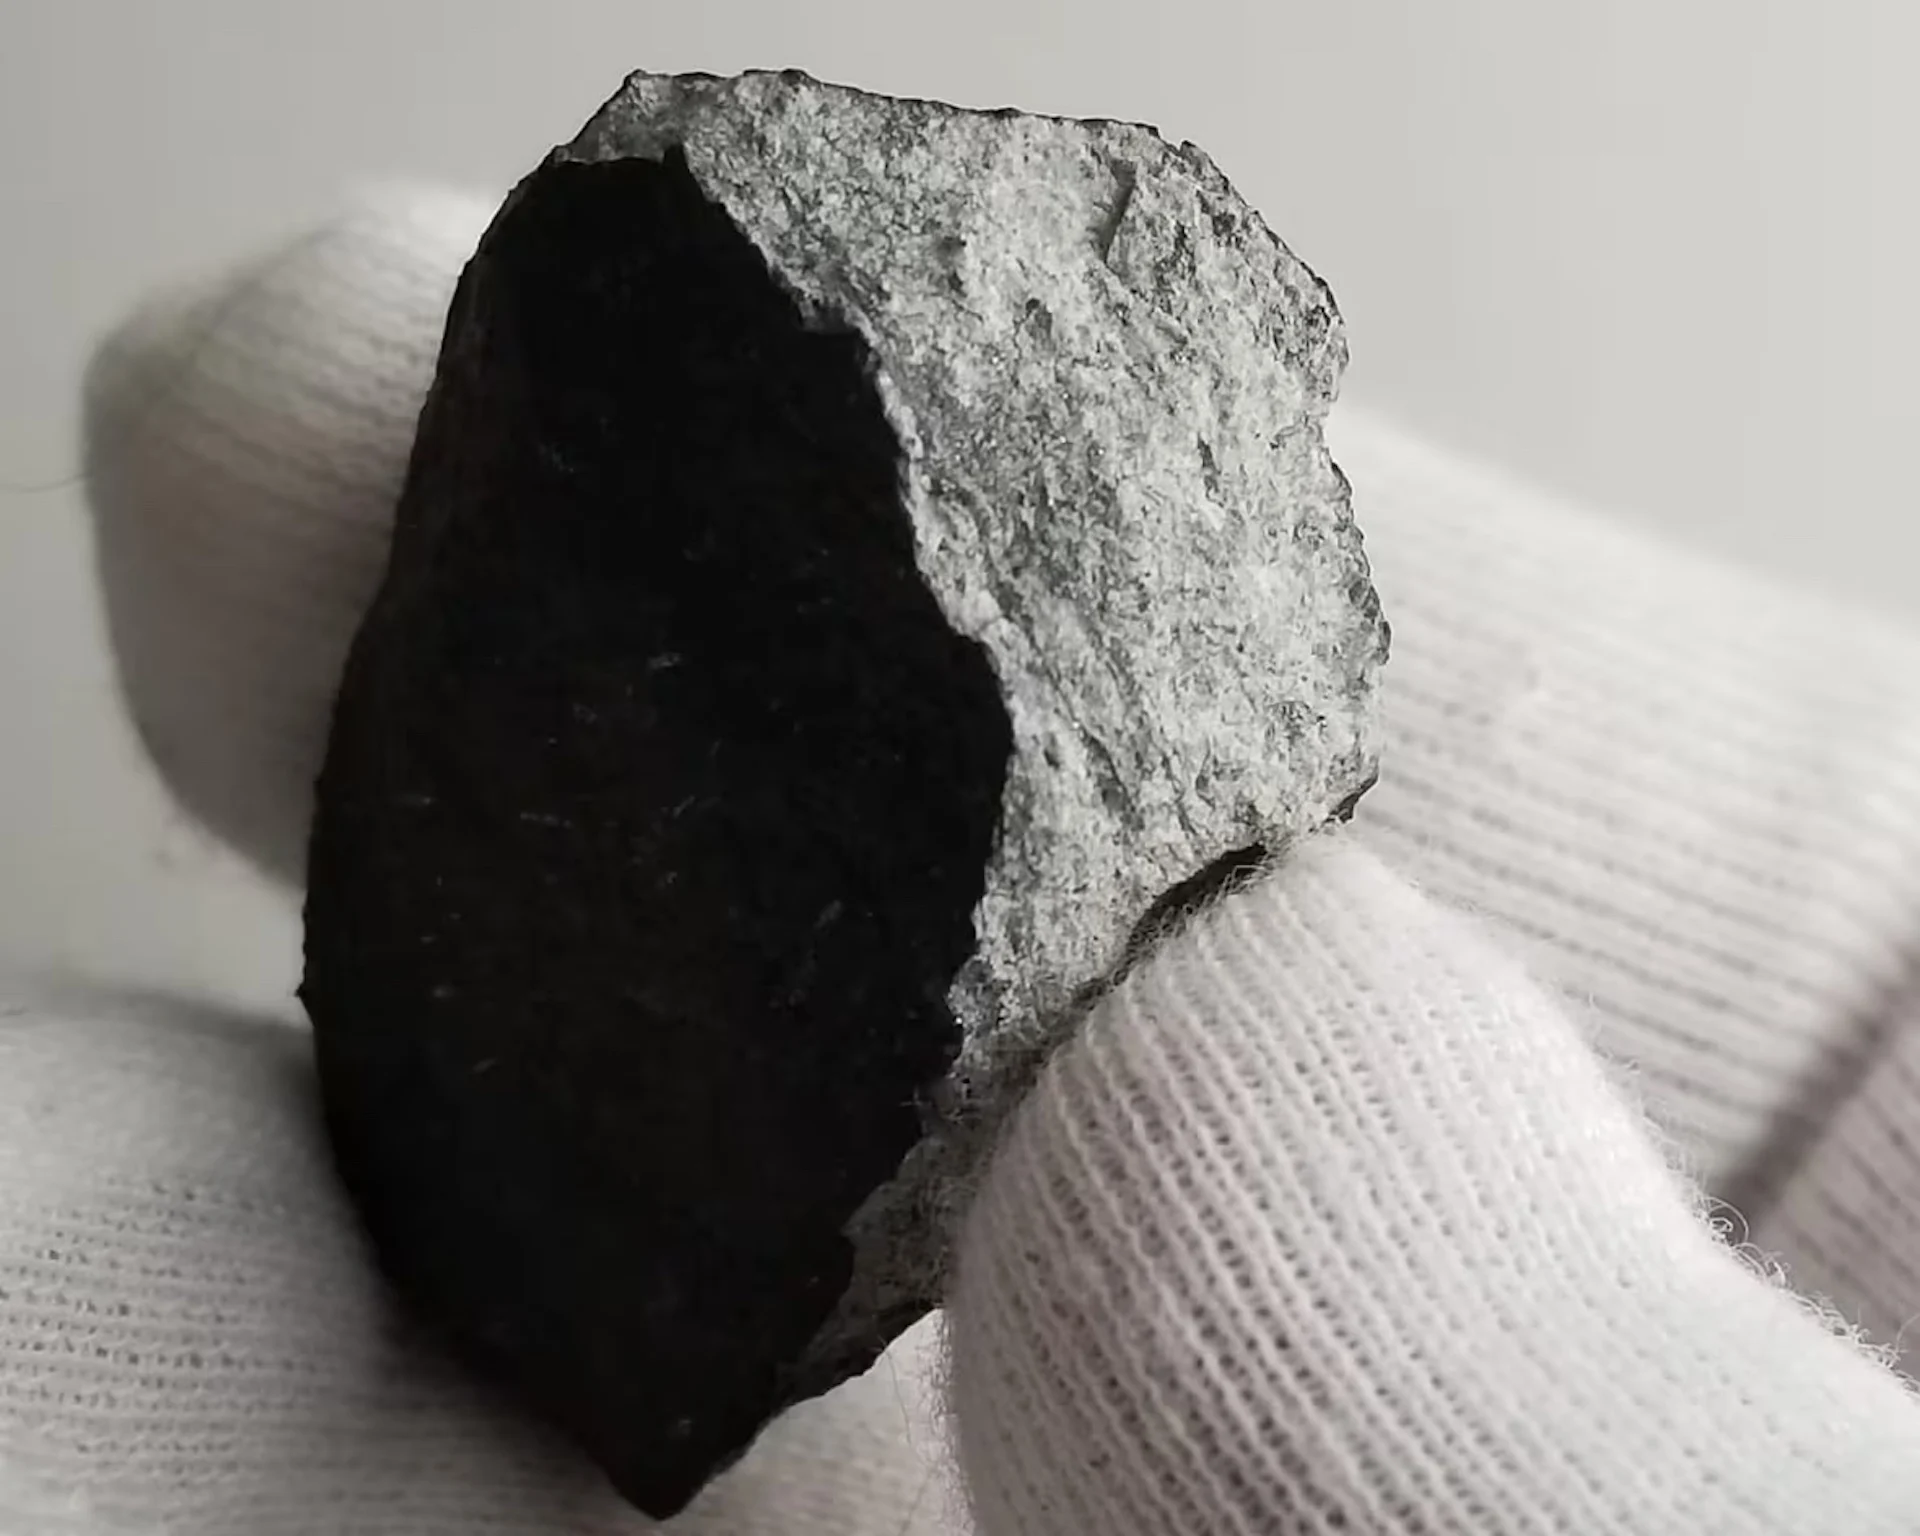 Finding the fireball: Museum offers US$25,000 for meteorite